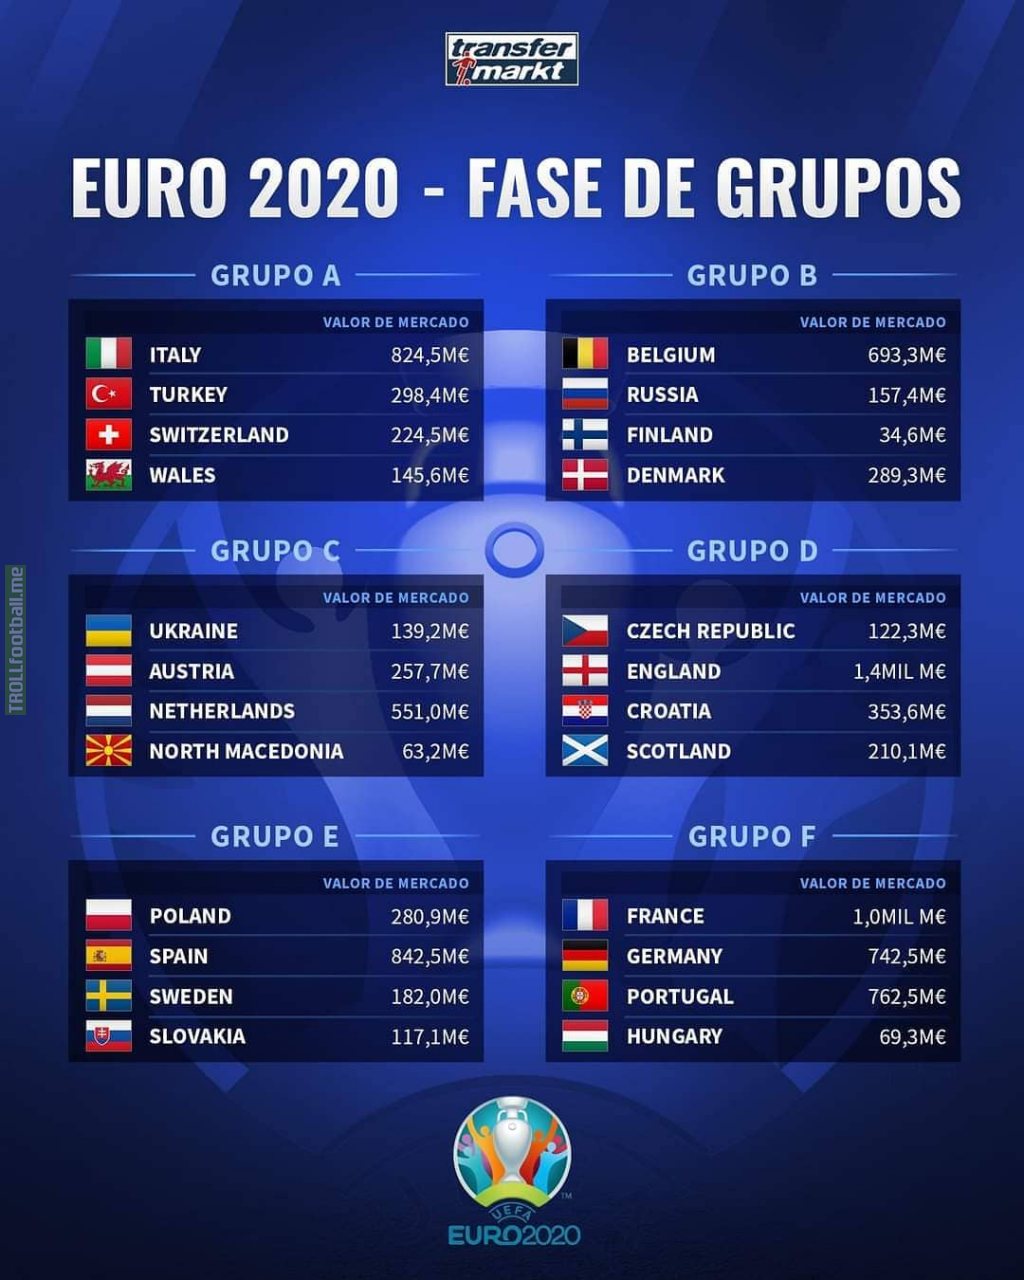 Squad value for every Euro 2020 NT. Source: transfermarkt.